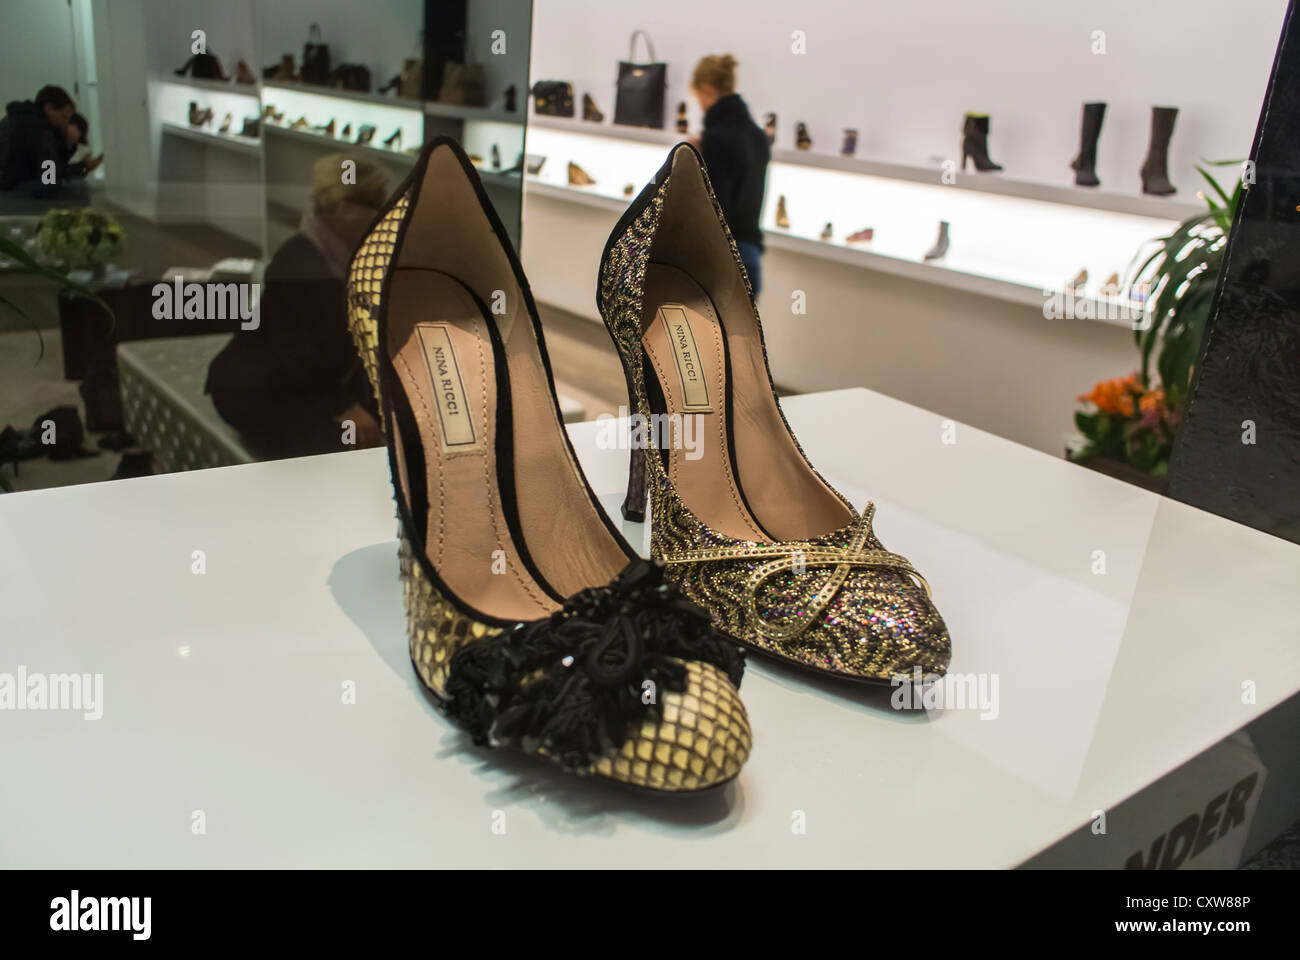 New York City, NY, USA, Women's Accessories High Heels Luxury Shoes on  Display in WIndow of "